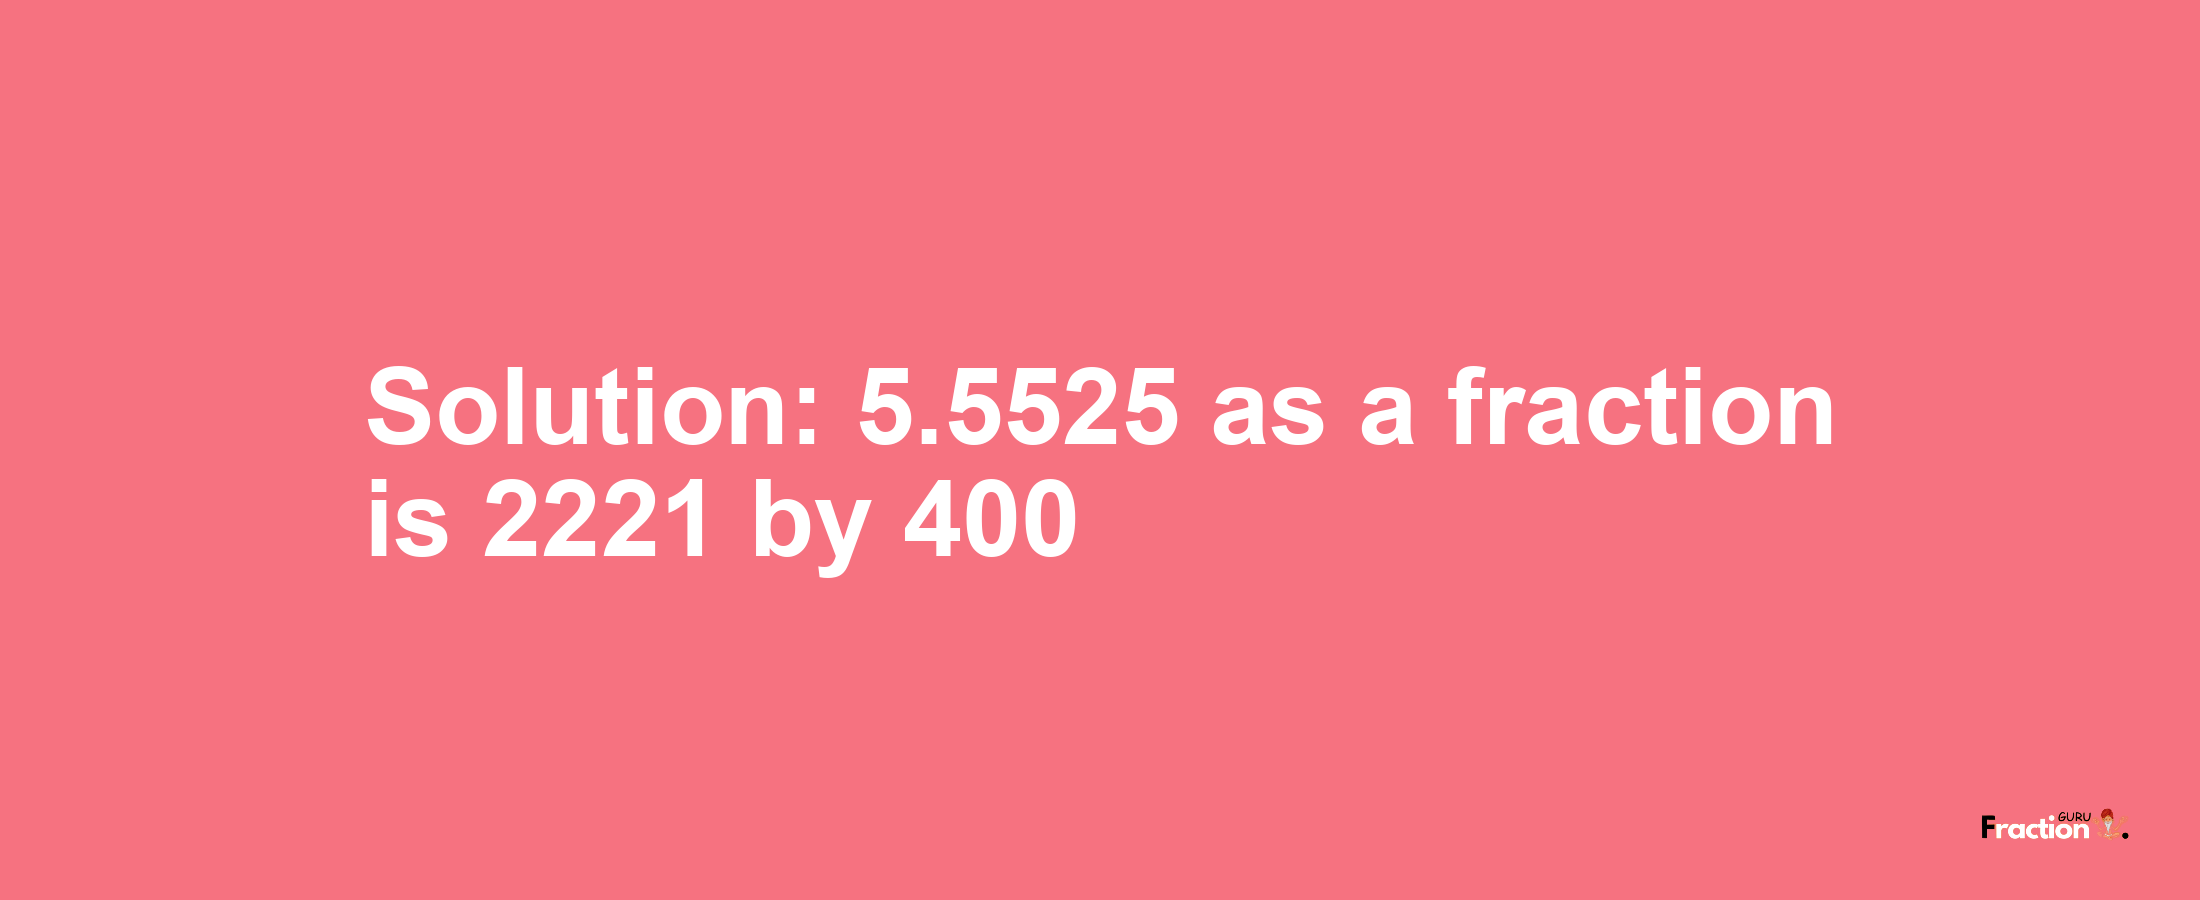 Solution:5.5525 as a fraction is 2221/400